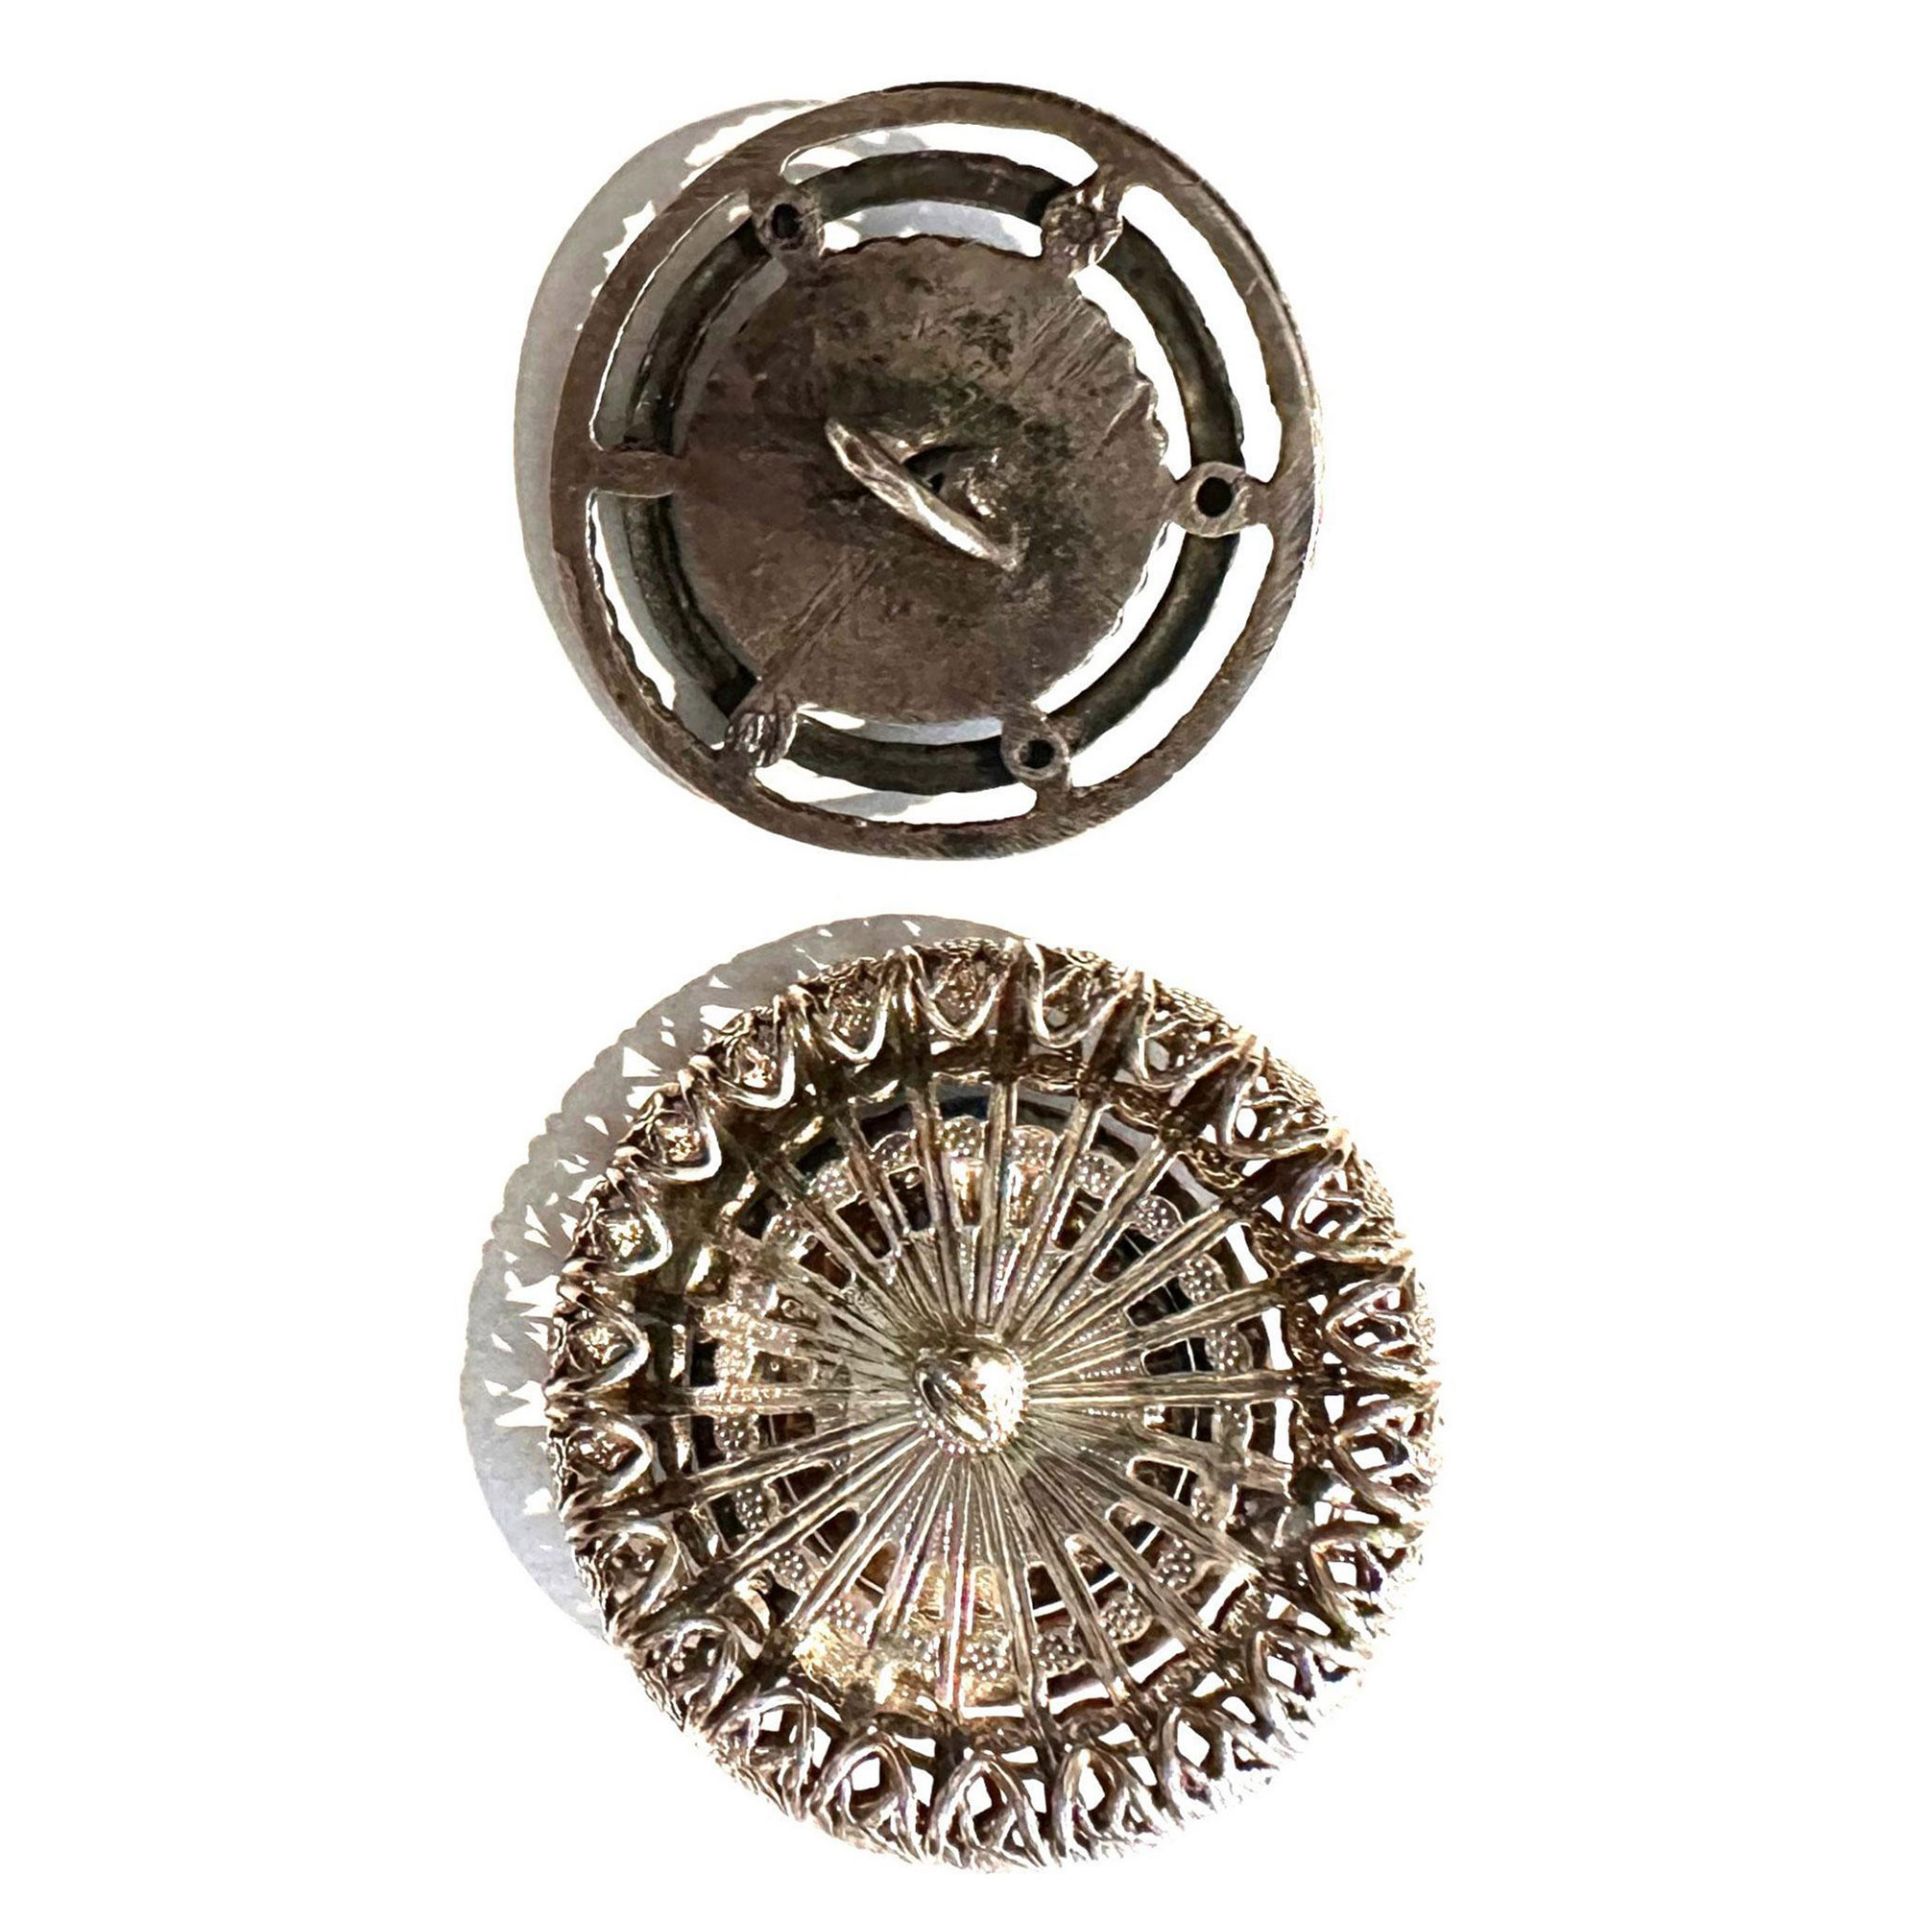 A Small Card of Metal Jeweled Buttons - Image 4 of 4